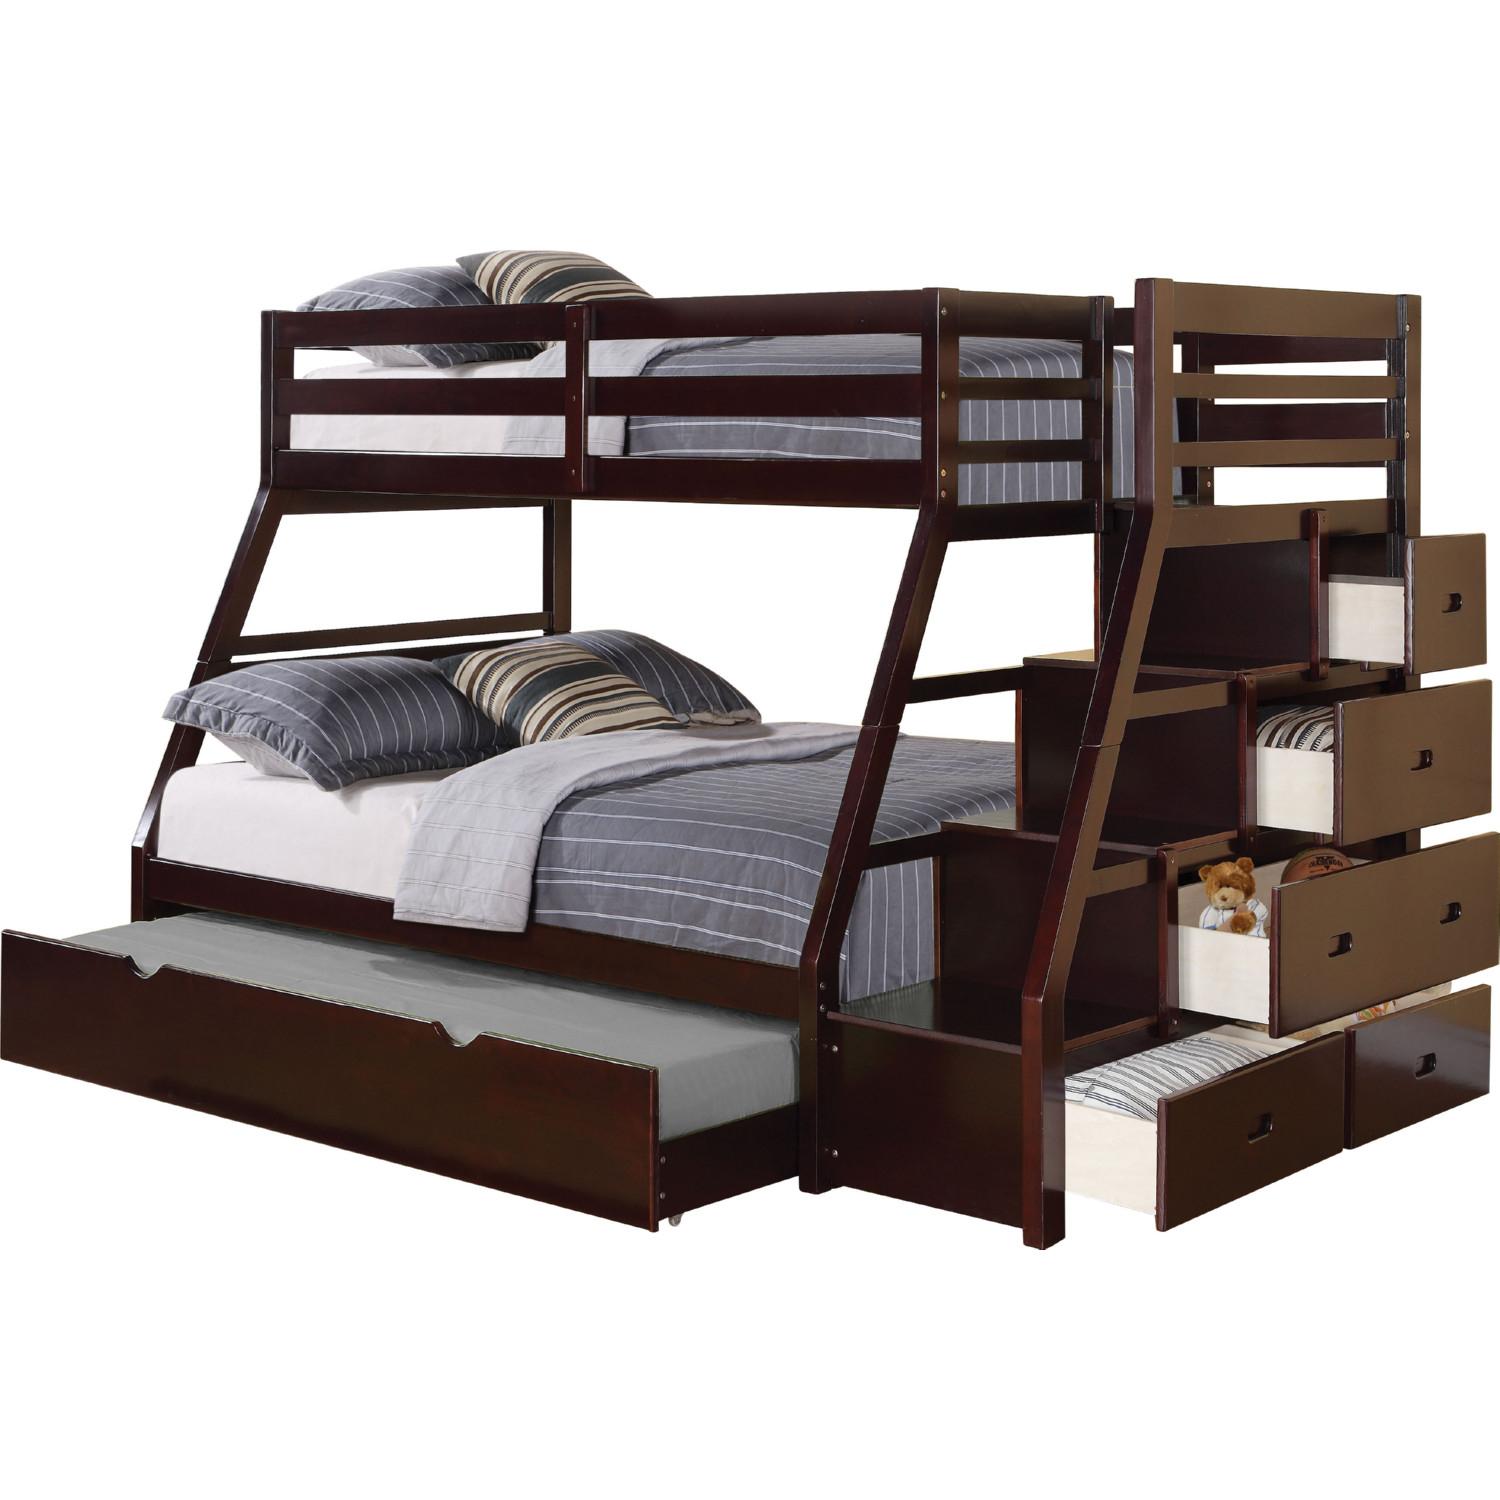 Transitional Twin/Full Bunk Bed Jason 37015 in Espresso 